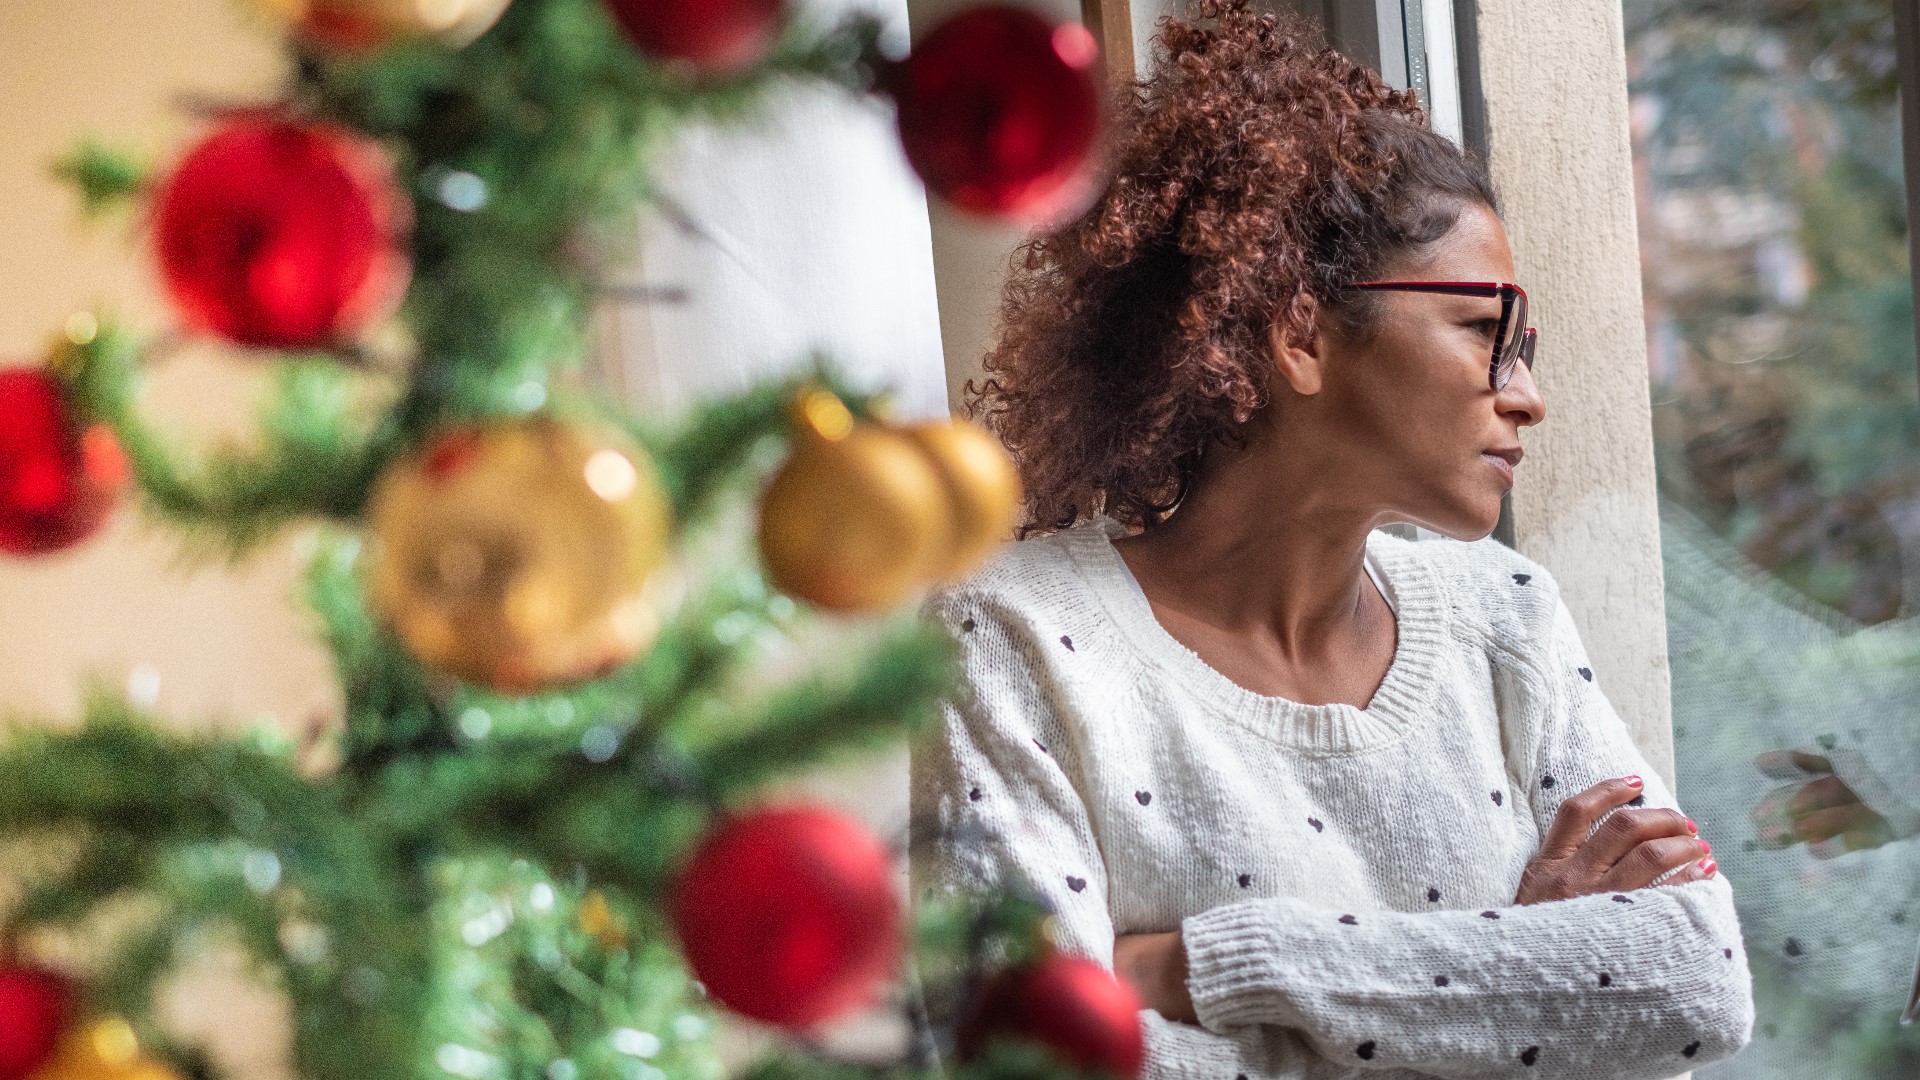 People mourning the loss of loved ones can have a rough time of it during the holidays. Sponsored by EvergreenHealth